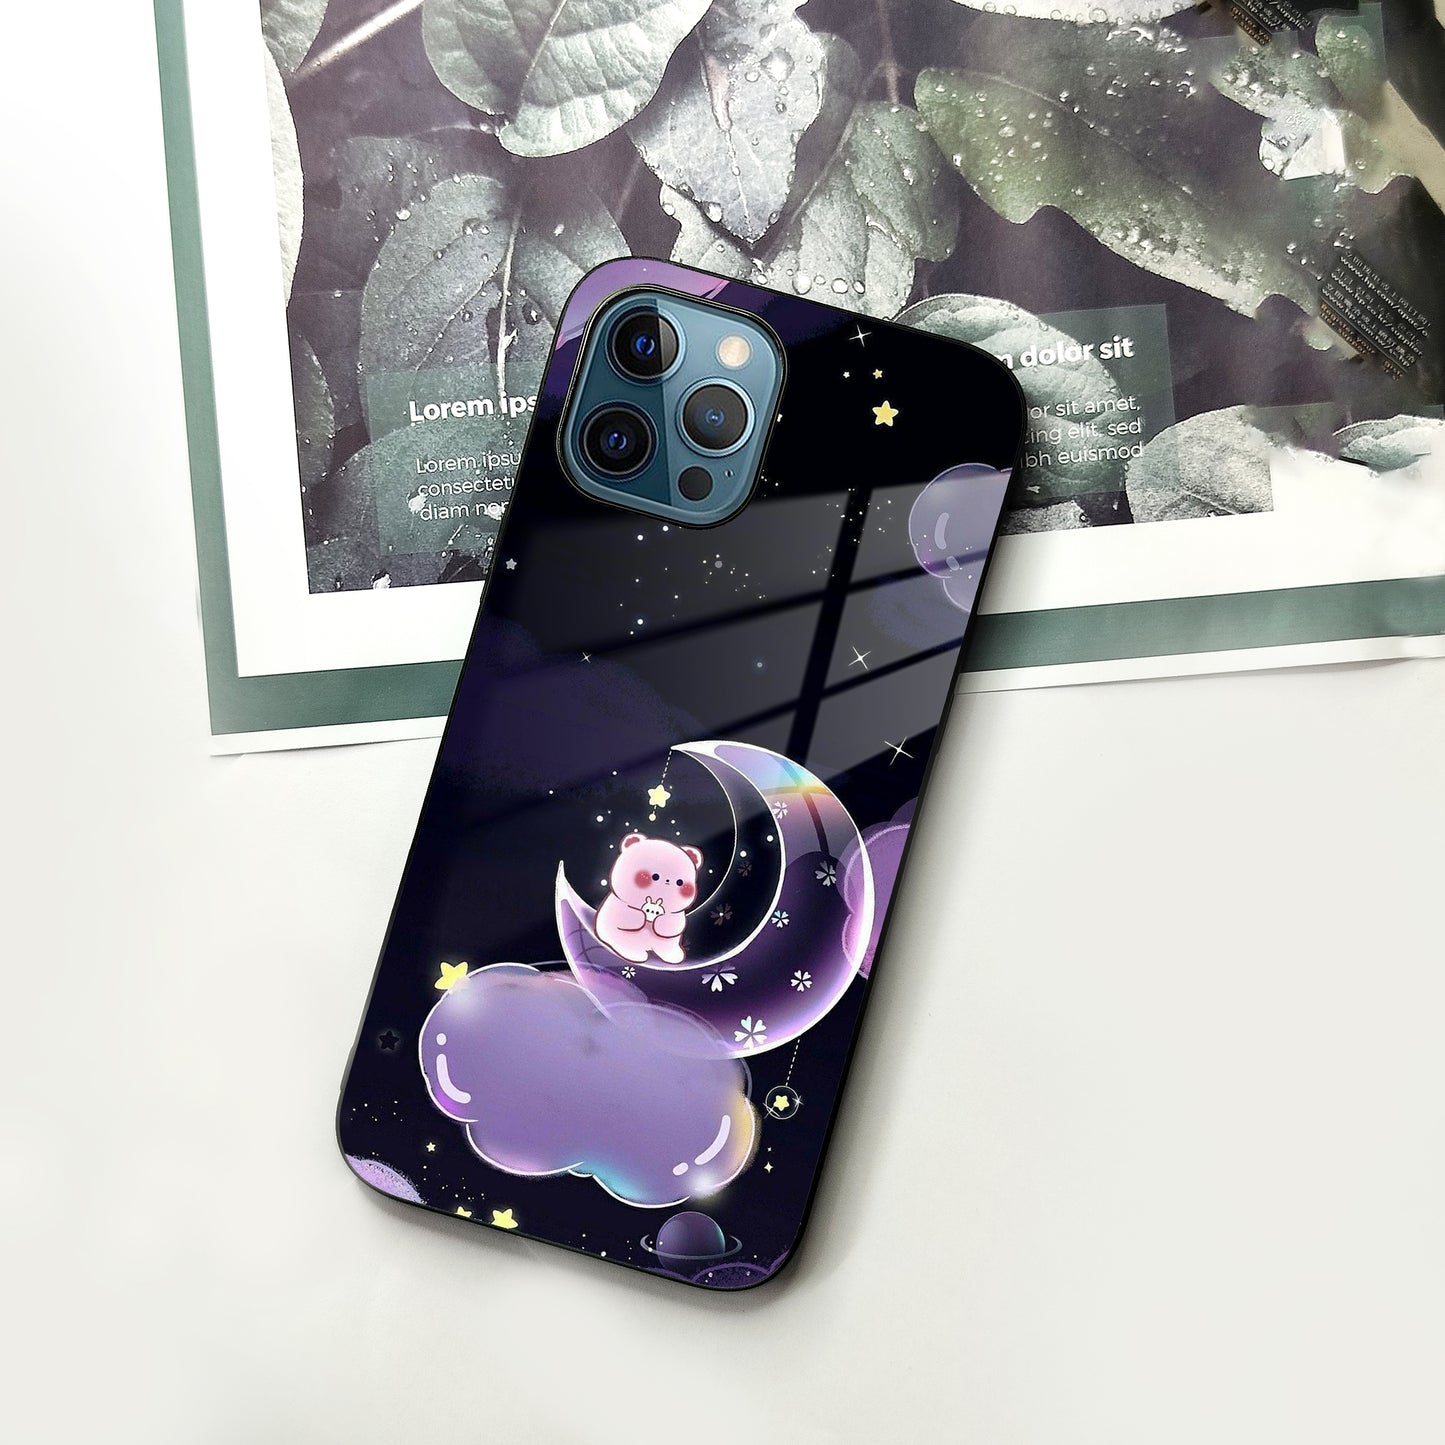 Sky Panda Design Glass Phone Case Cover For iPhone